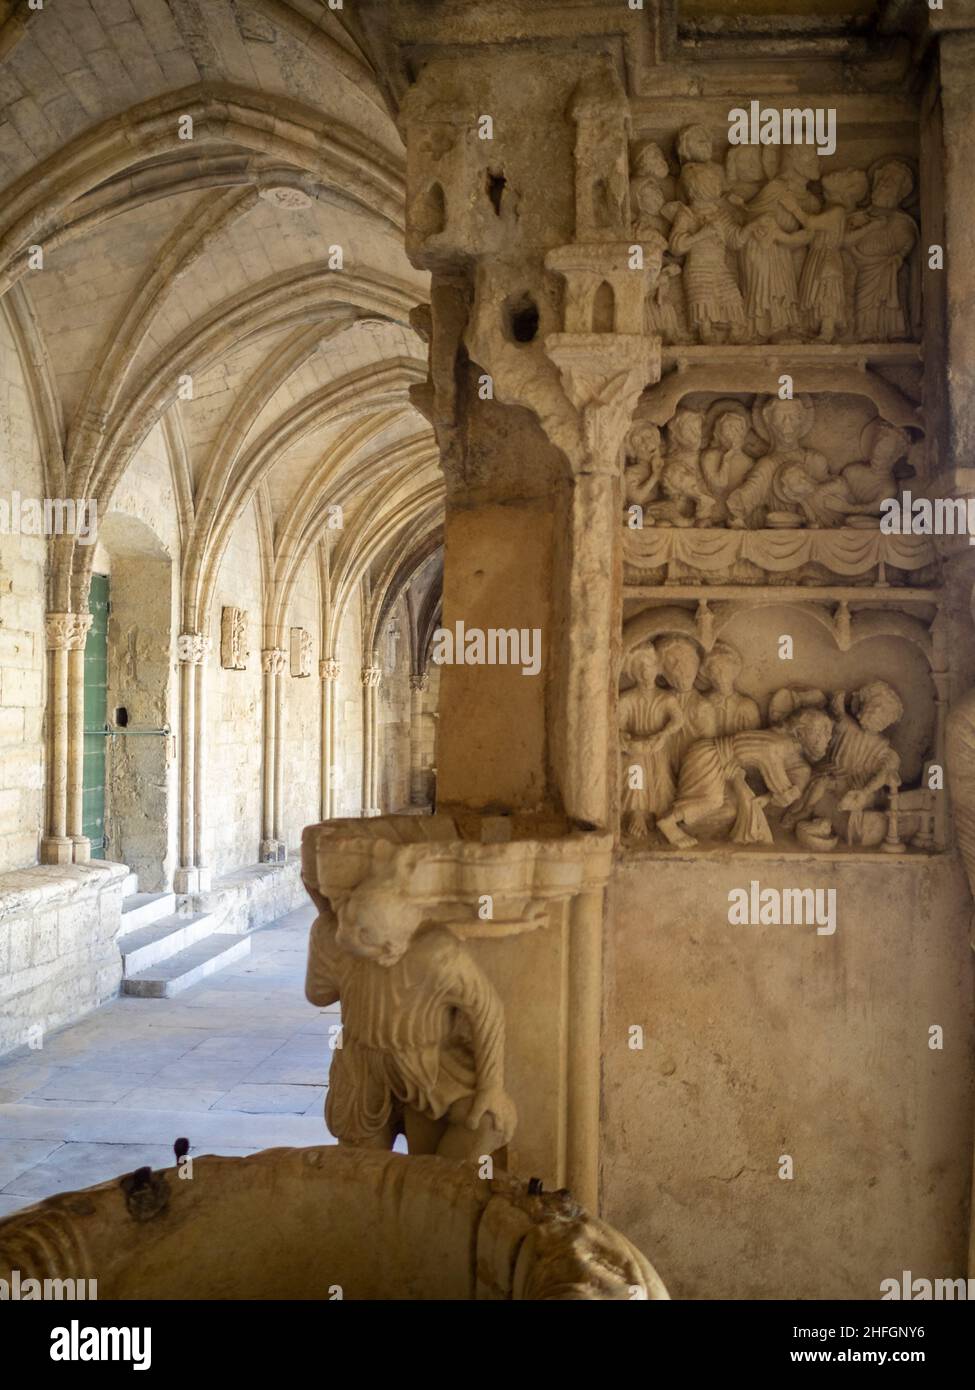 Carving details of St. Trophime cloister, Arles Stock Photo